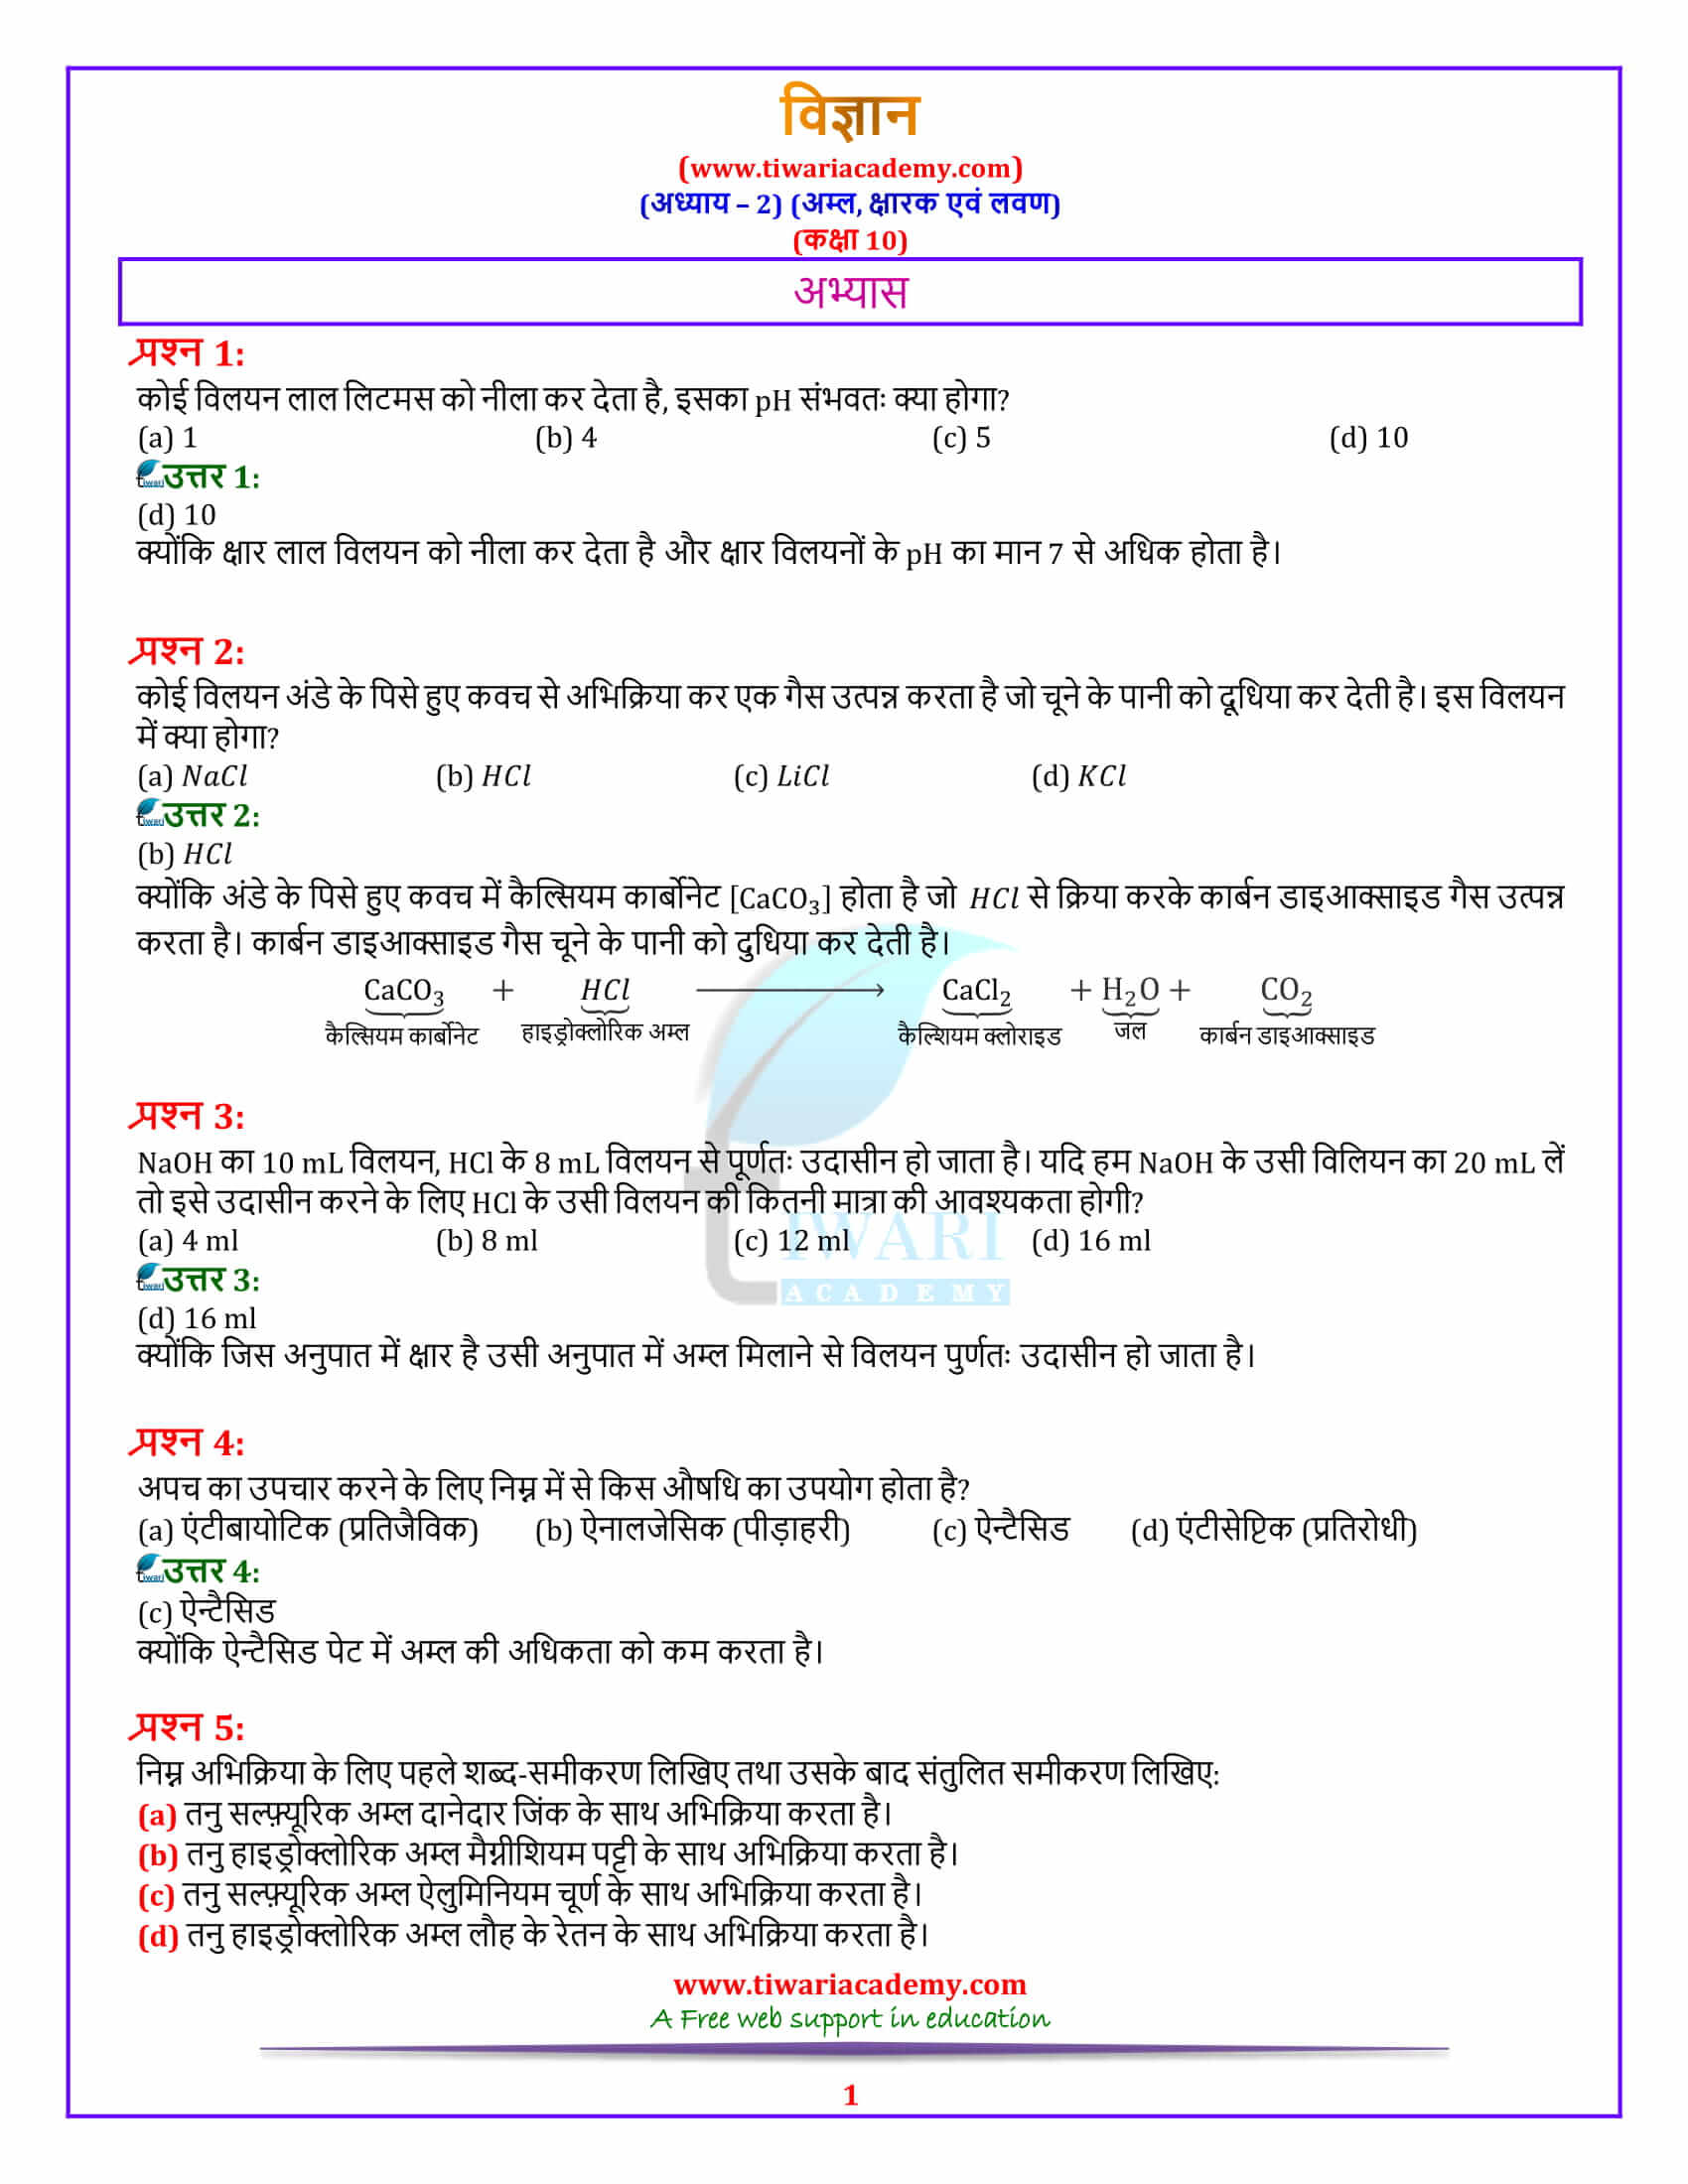 Class 10 Science Chapter 2 Acids, Bases and Salts in pdf form